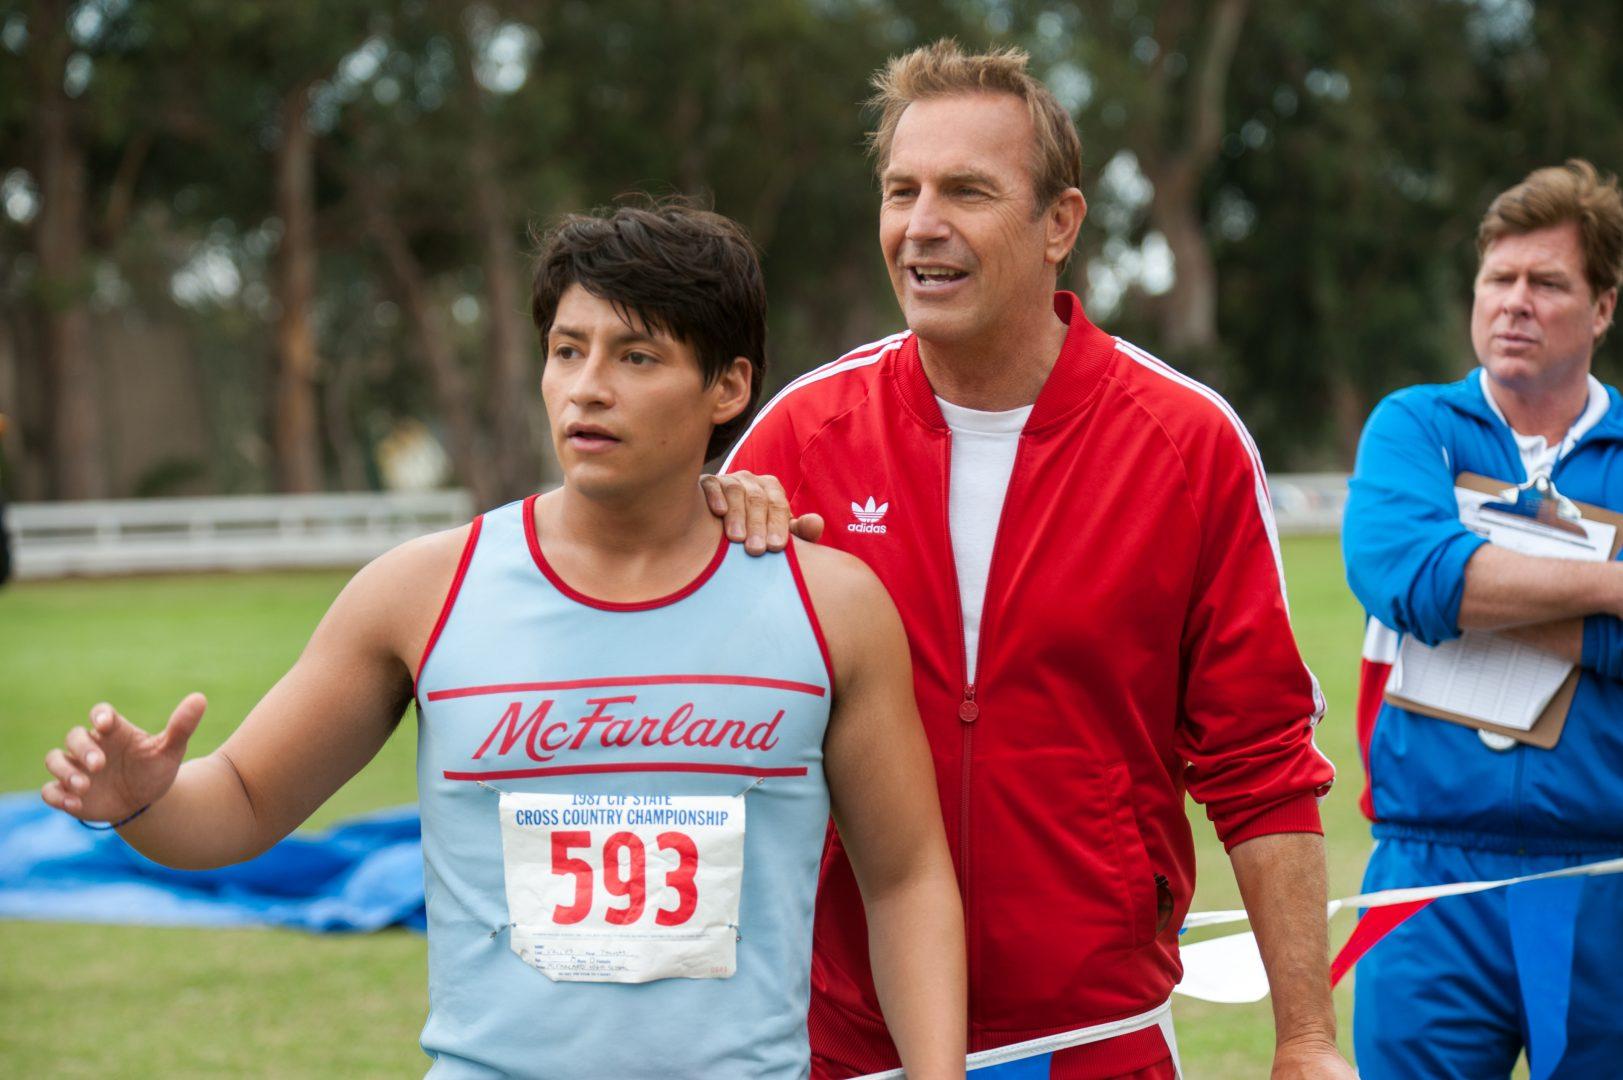 Left to right: Thomas Valles (Carlos Pratts) and Coach Jim White (Kevin Costner) 